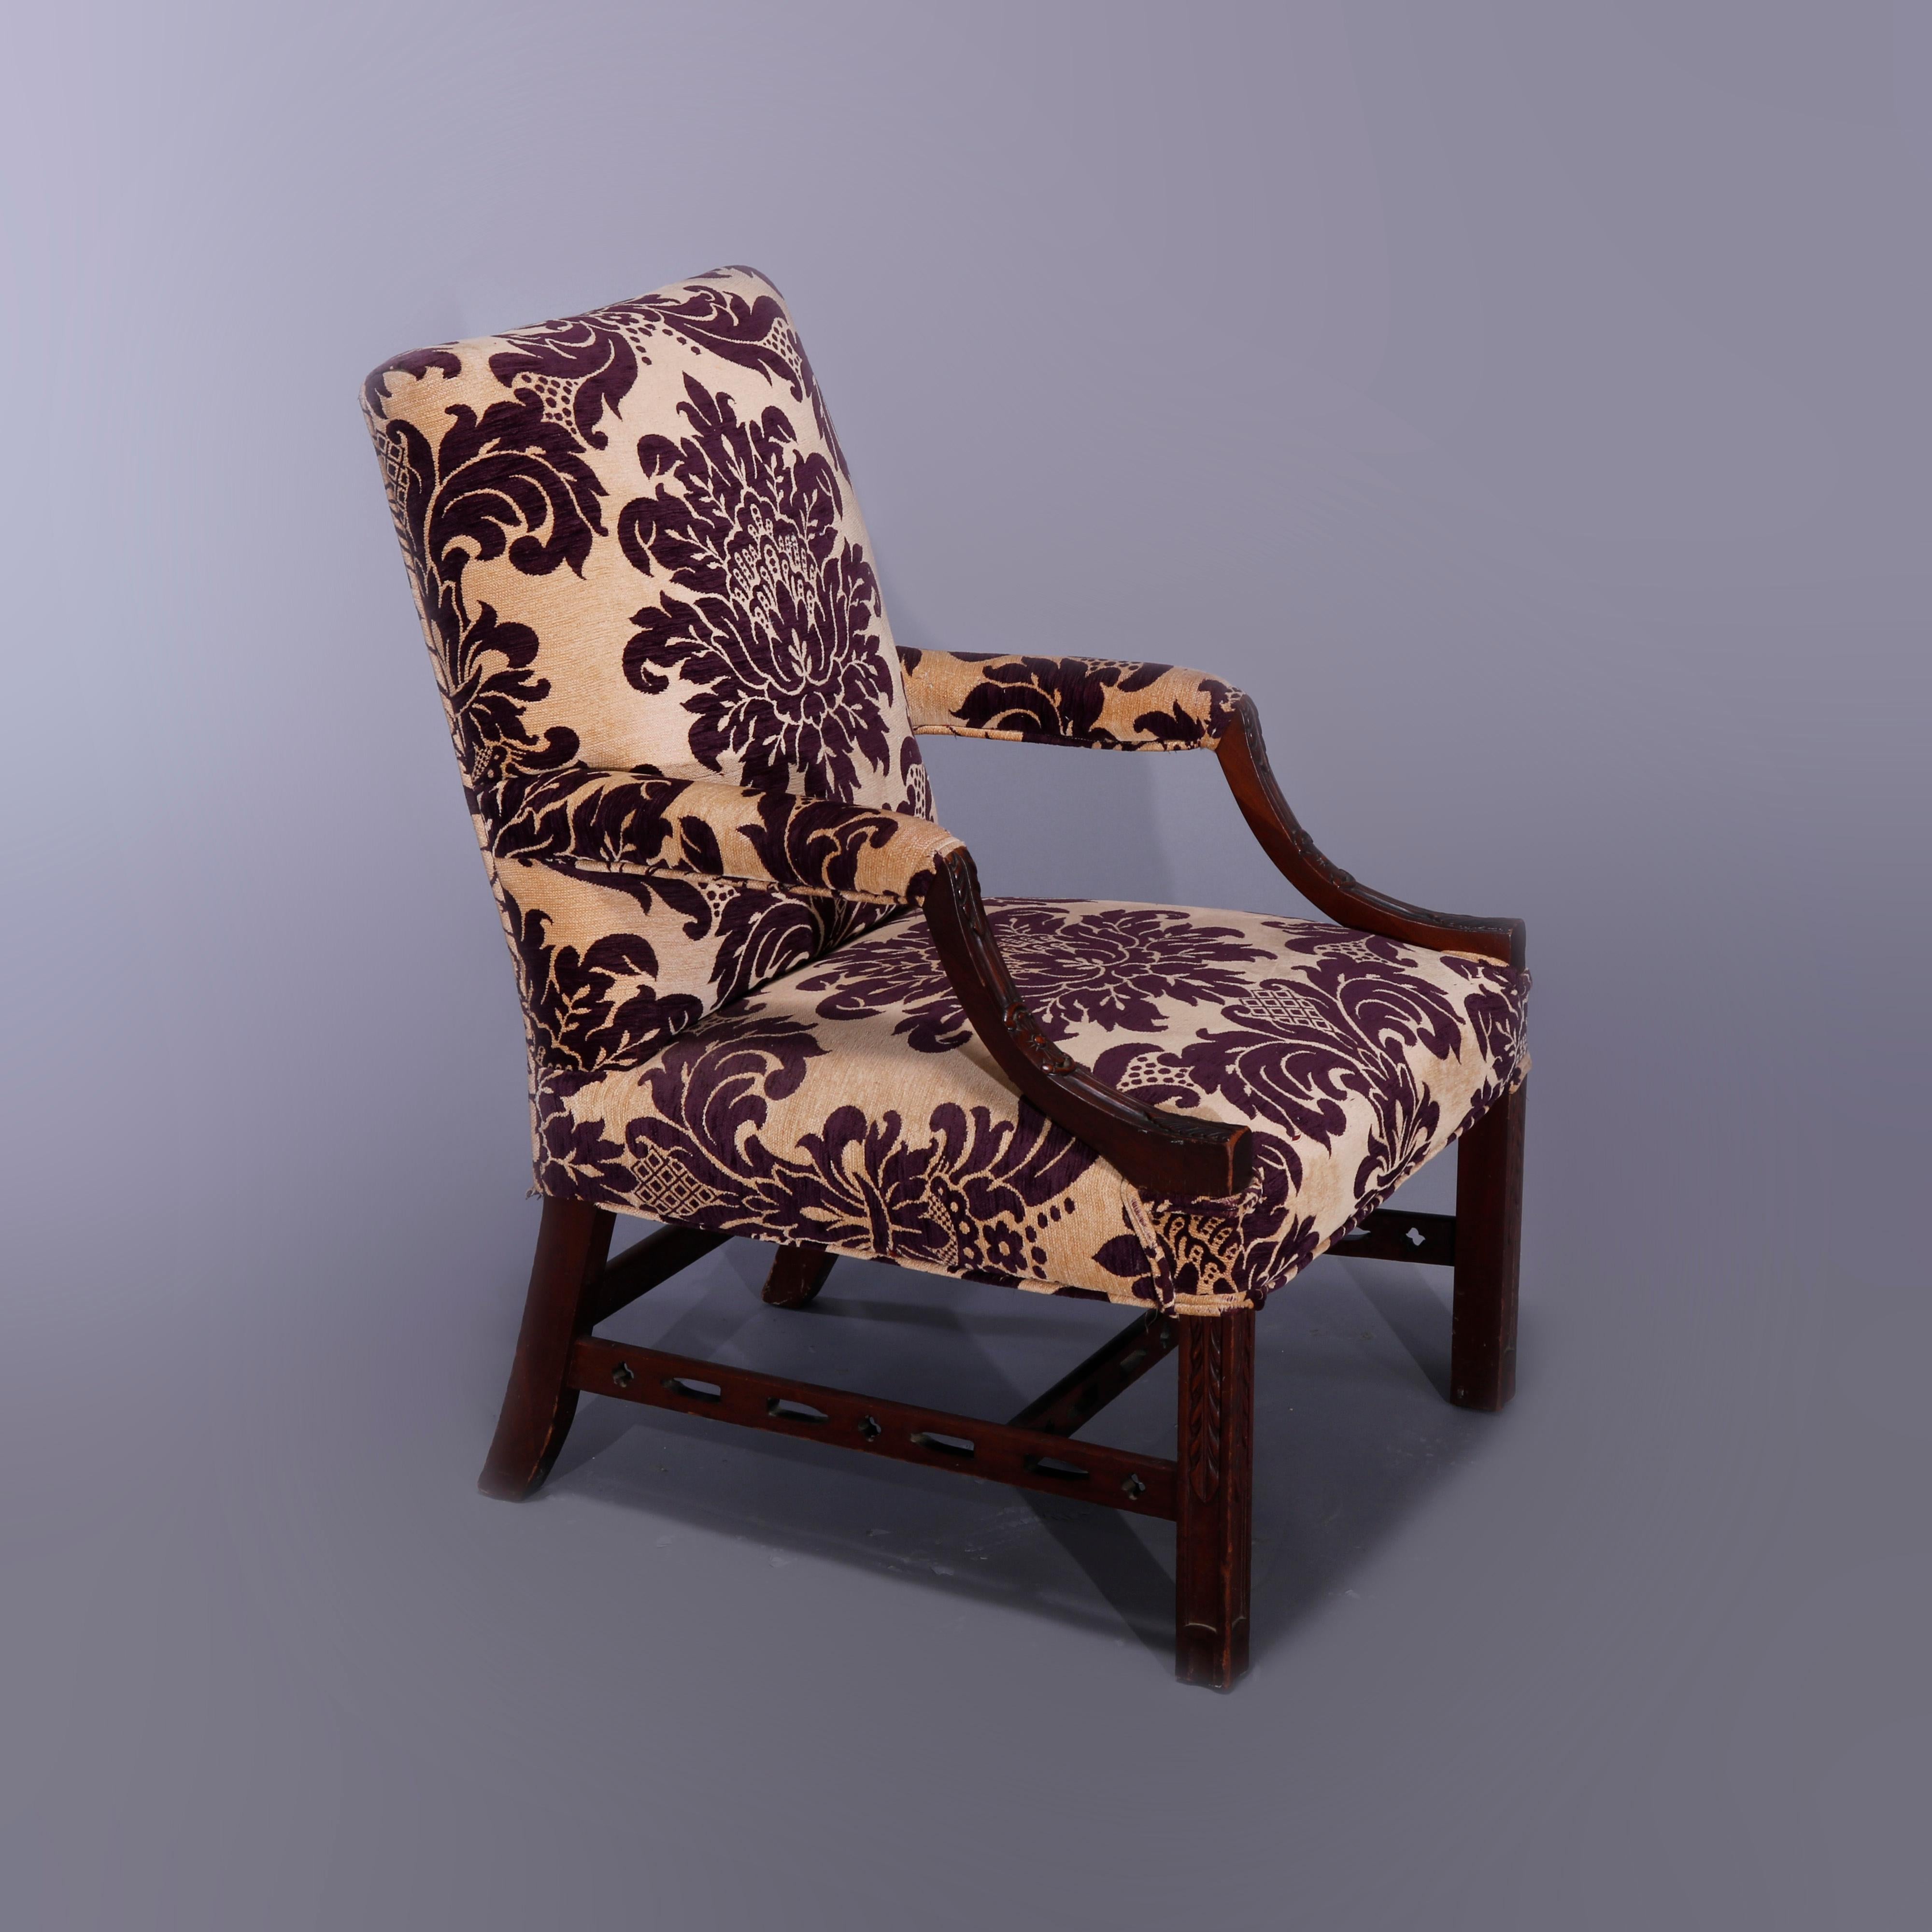 20th Century Antique English Georgian Style Upholstered Mahogany Lolling Chair, circa 1920